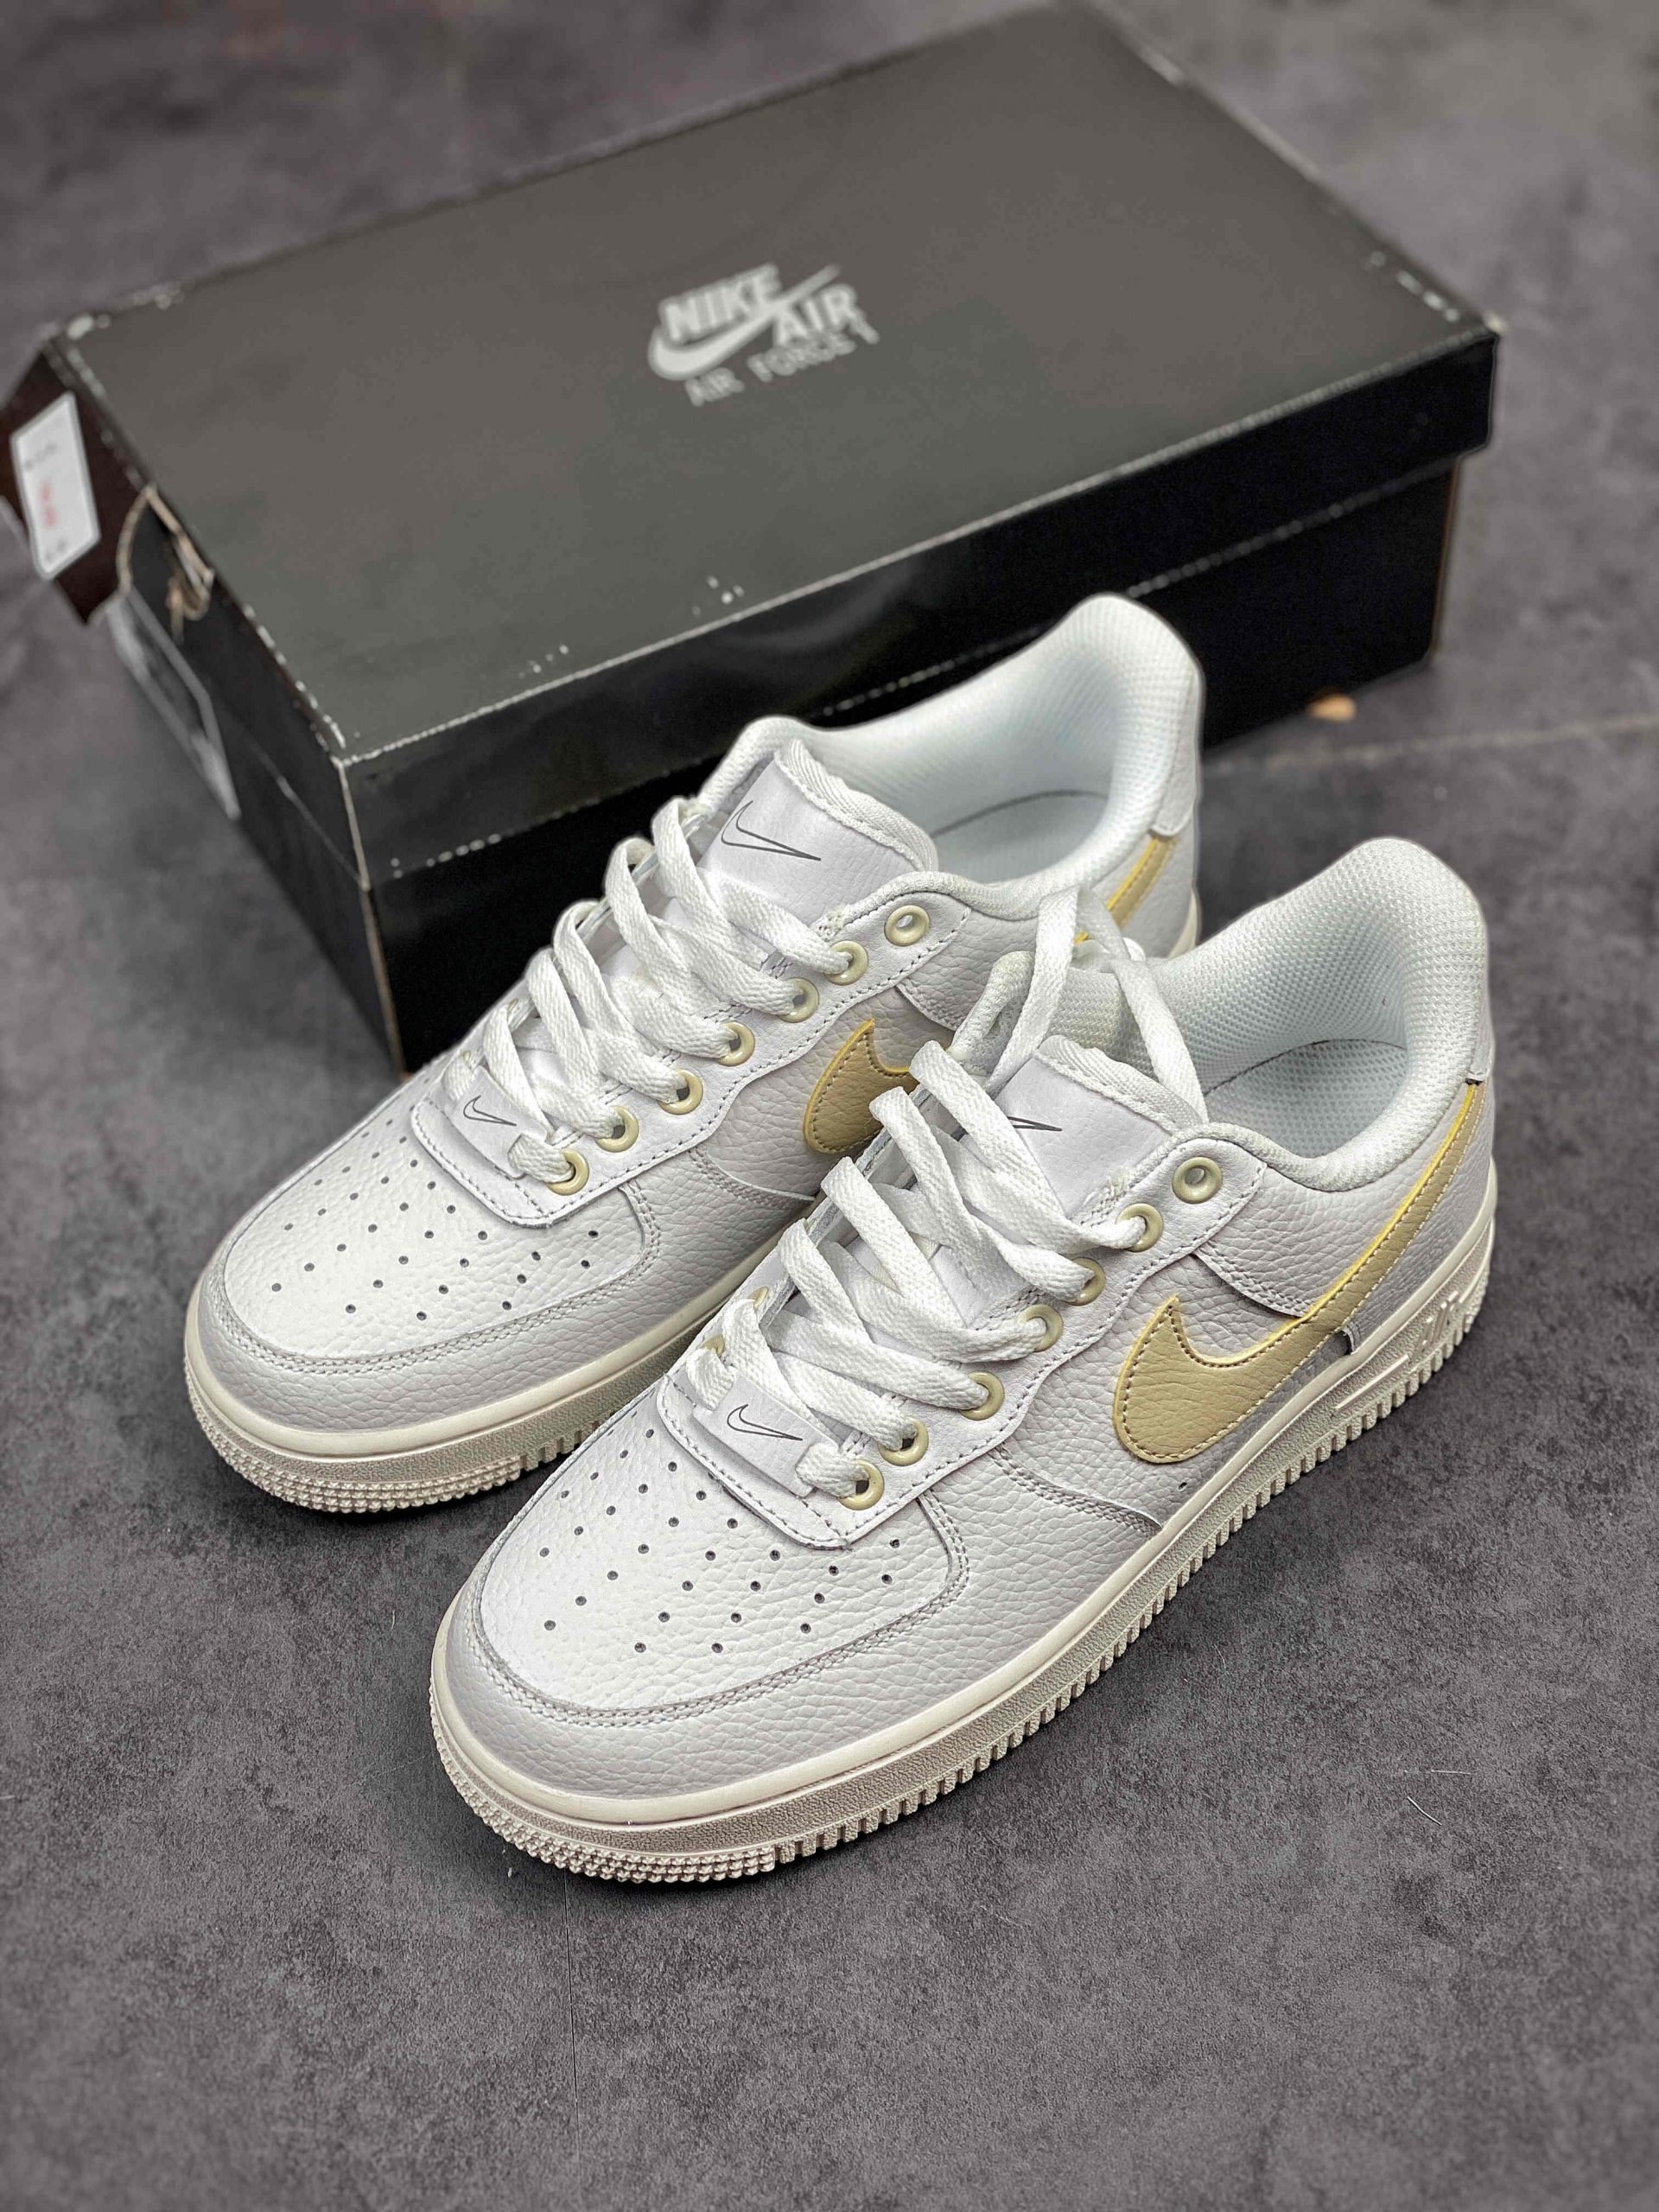 Nike Air Force 1 Low White/Light Bone DC1162-100 For Sale – Sneaker Hello